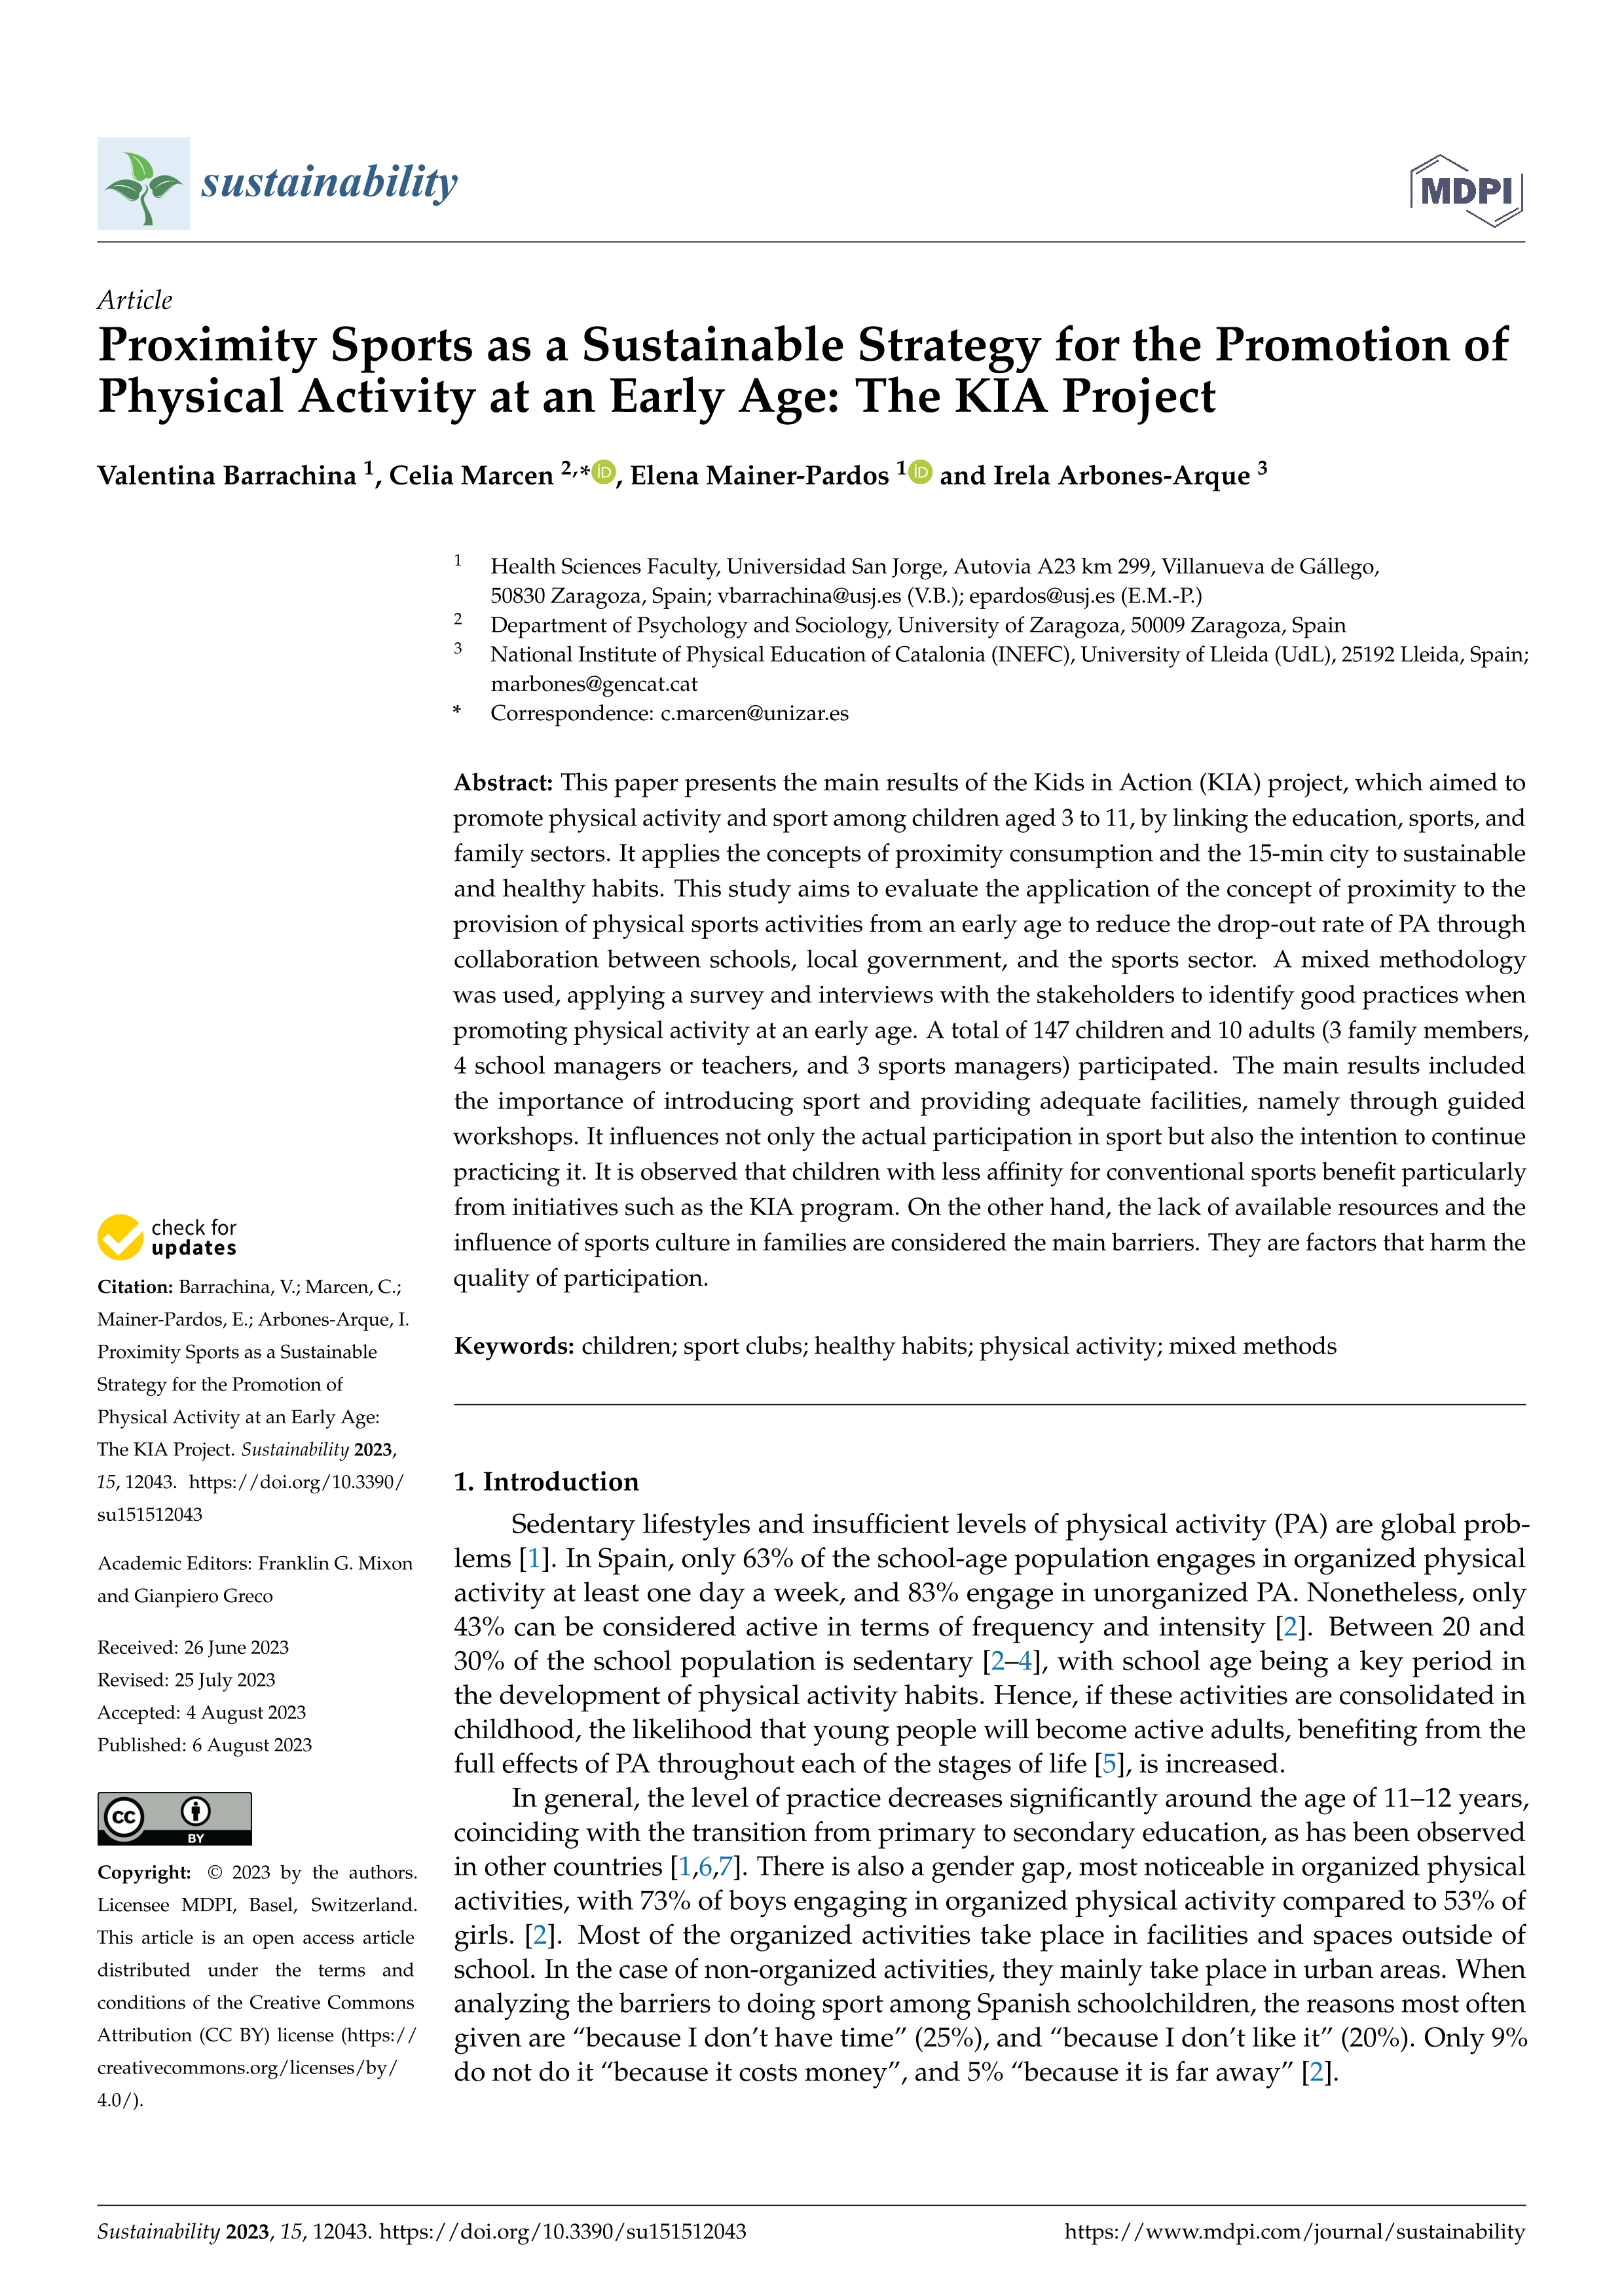 Proximity Sports as a Sustainable Strategy for the Promotion of Physical Activity at an Early Age: The KIA Project